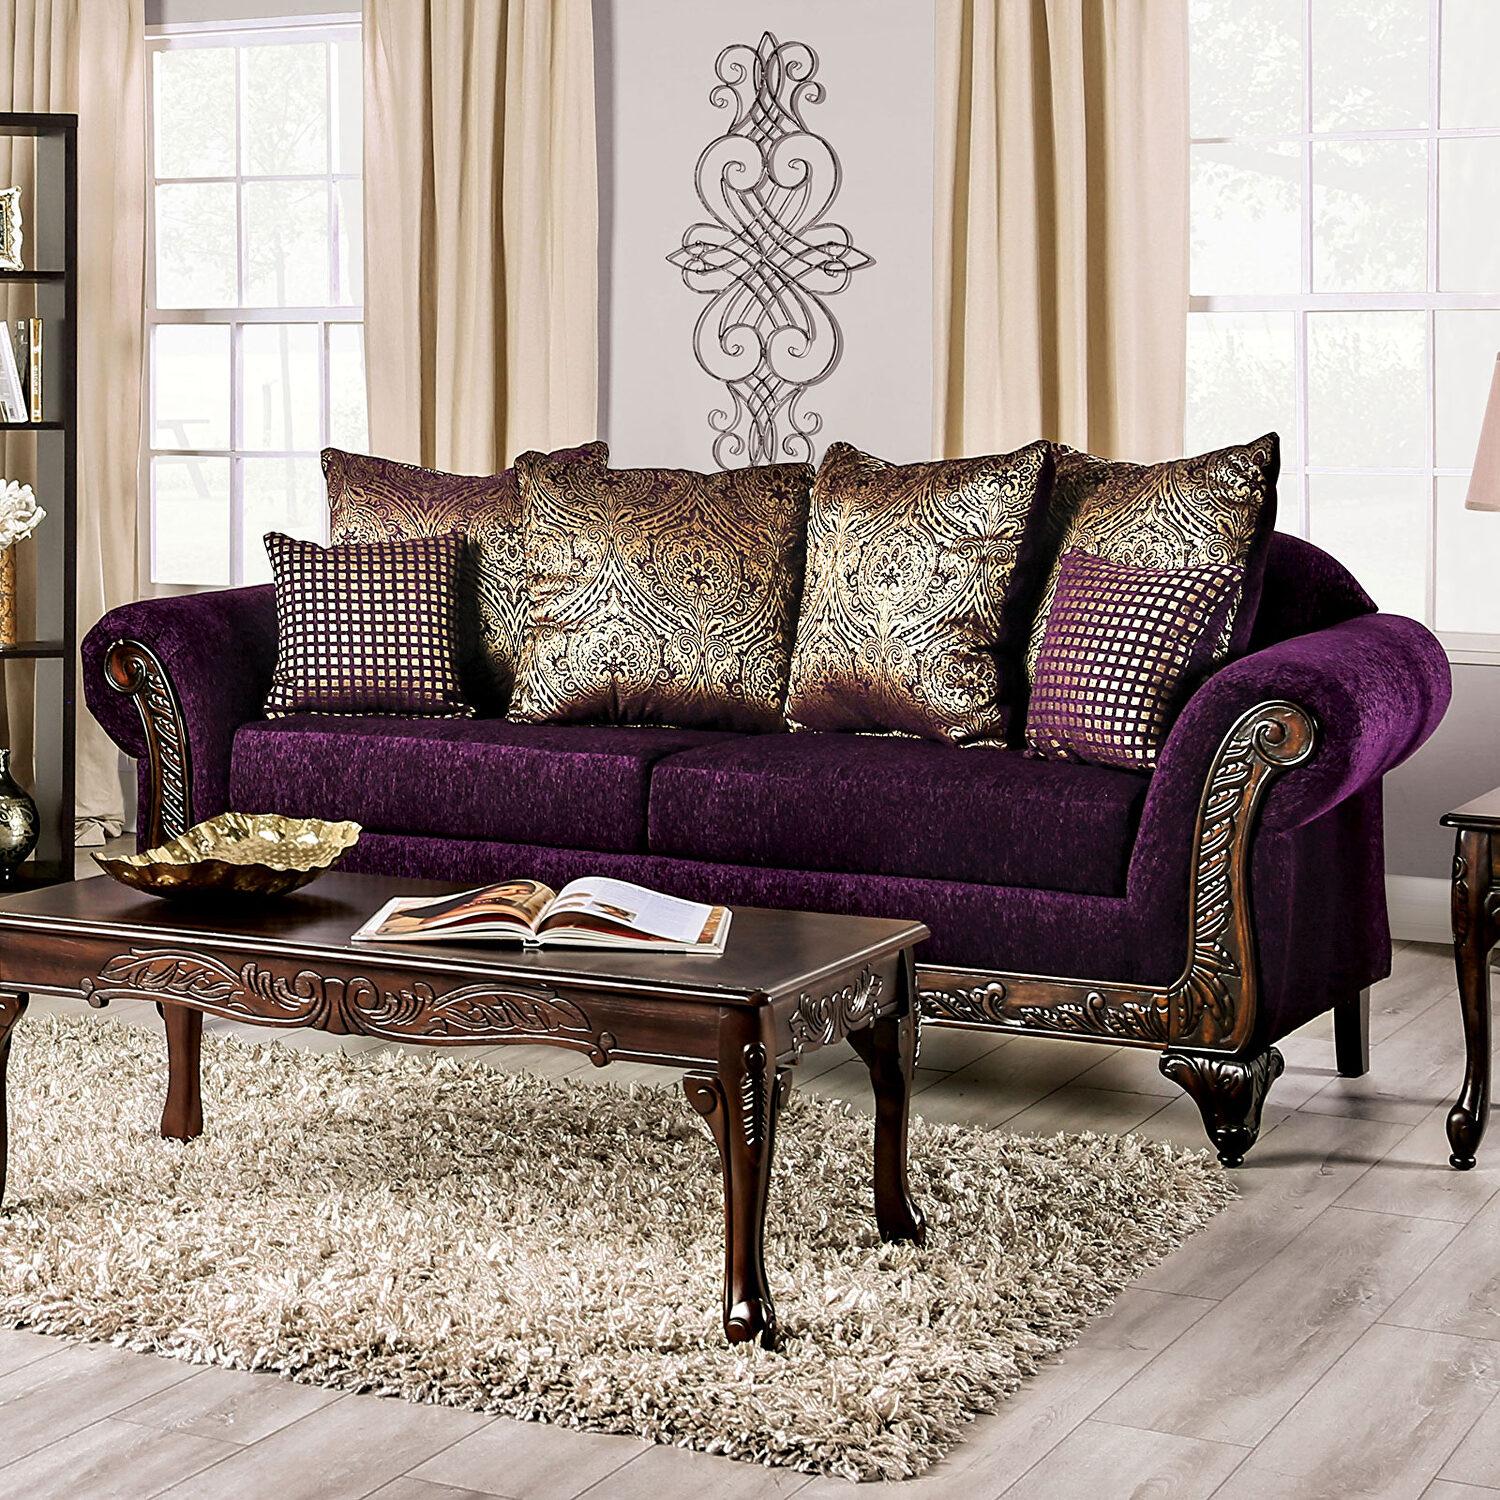 Second Life Marketplace - UD Gothic Victorian Purple Loveseat Sofa Couch